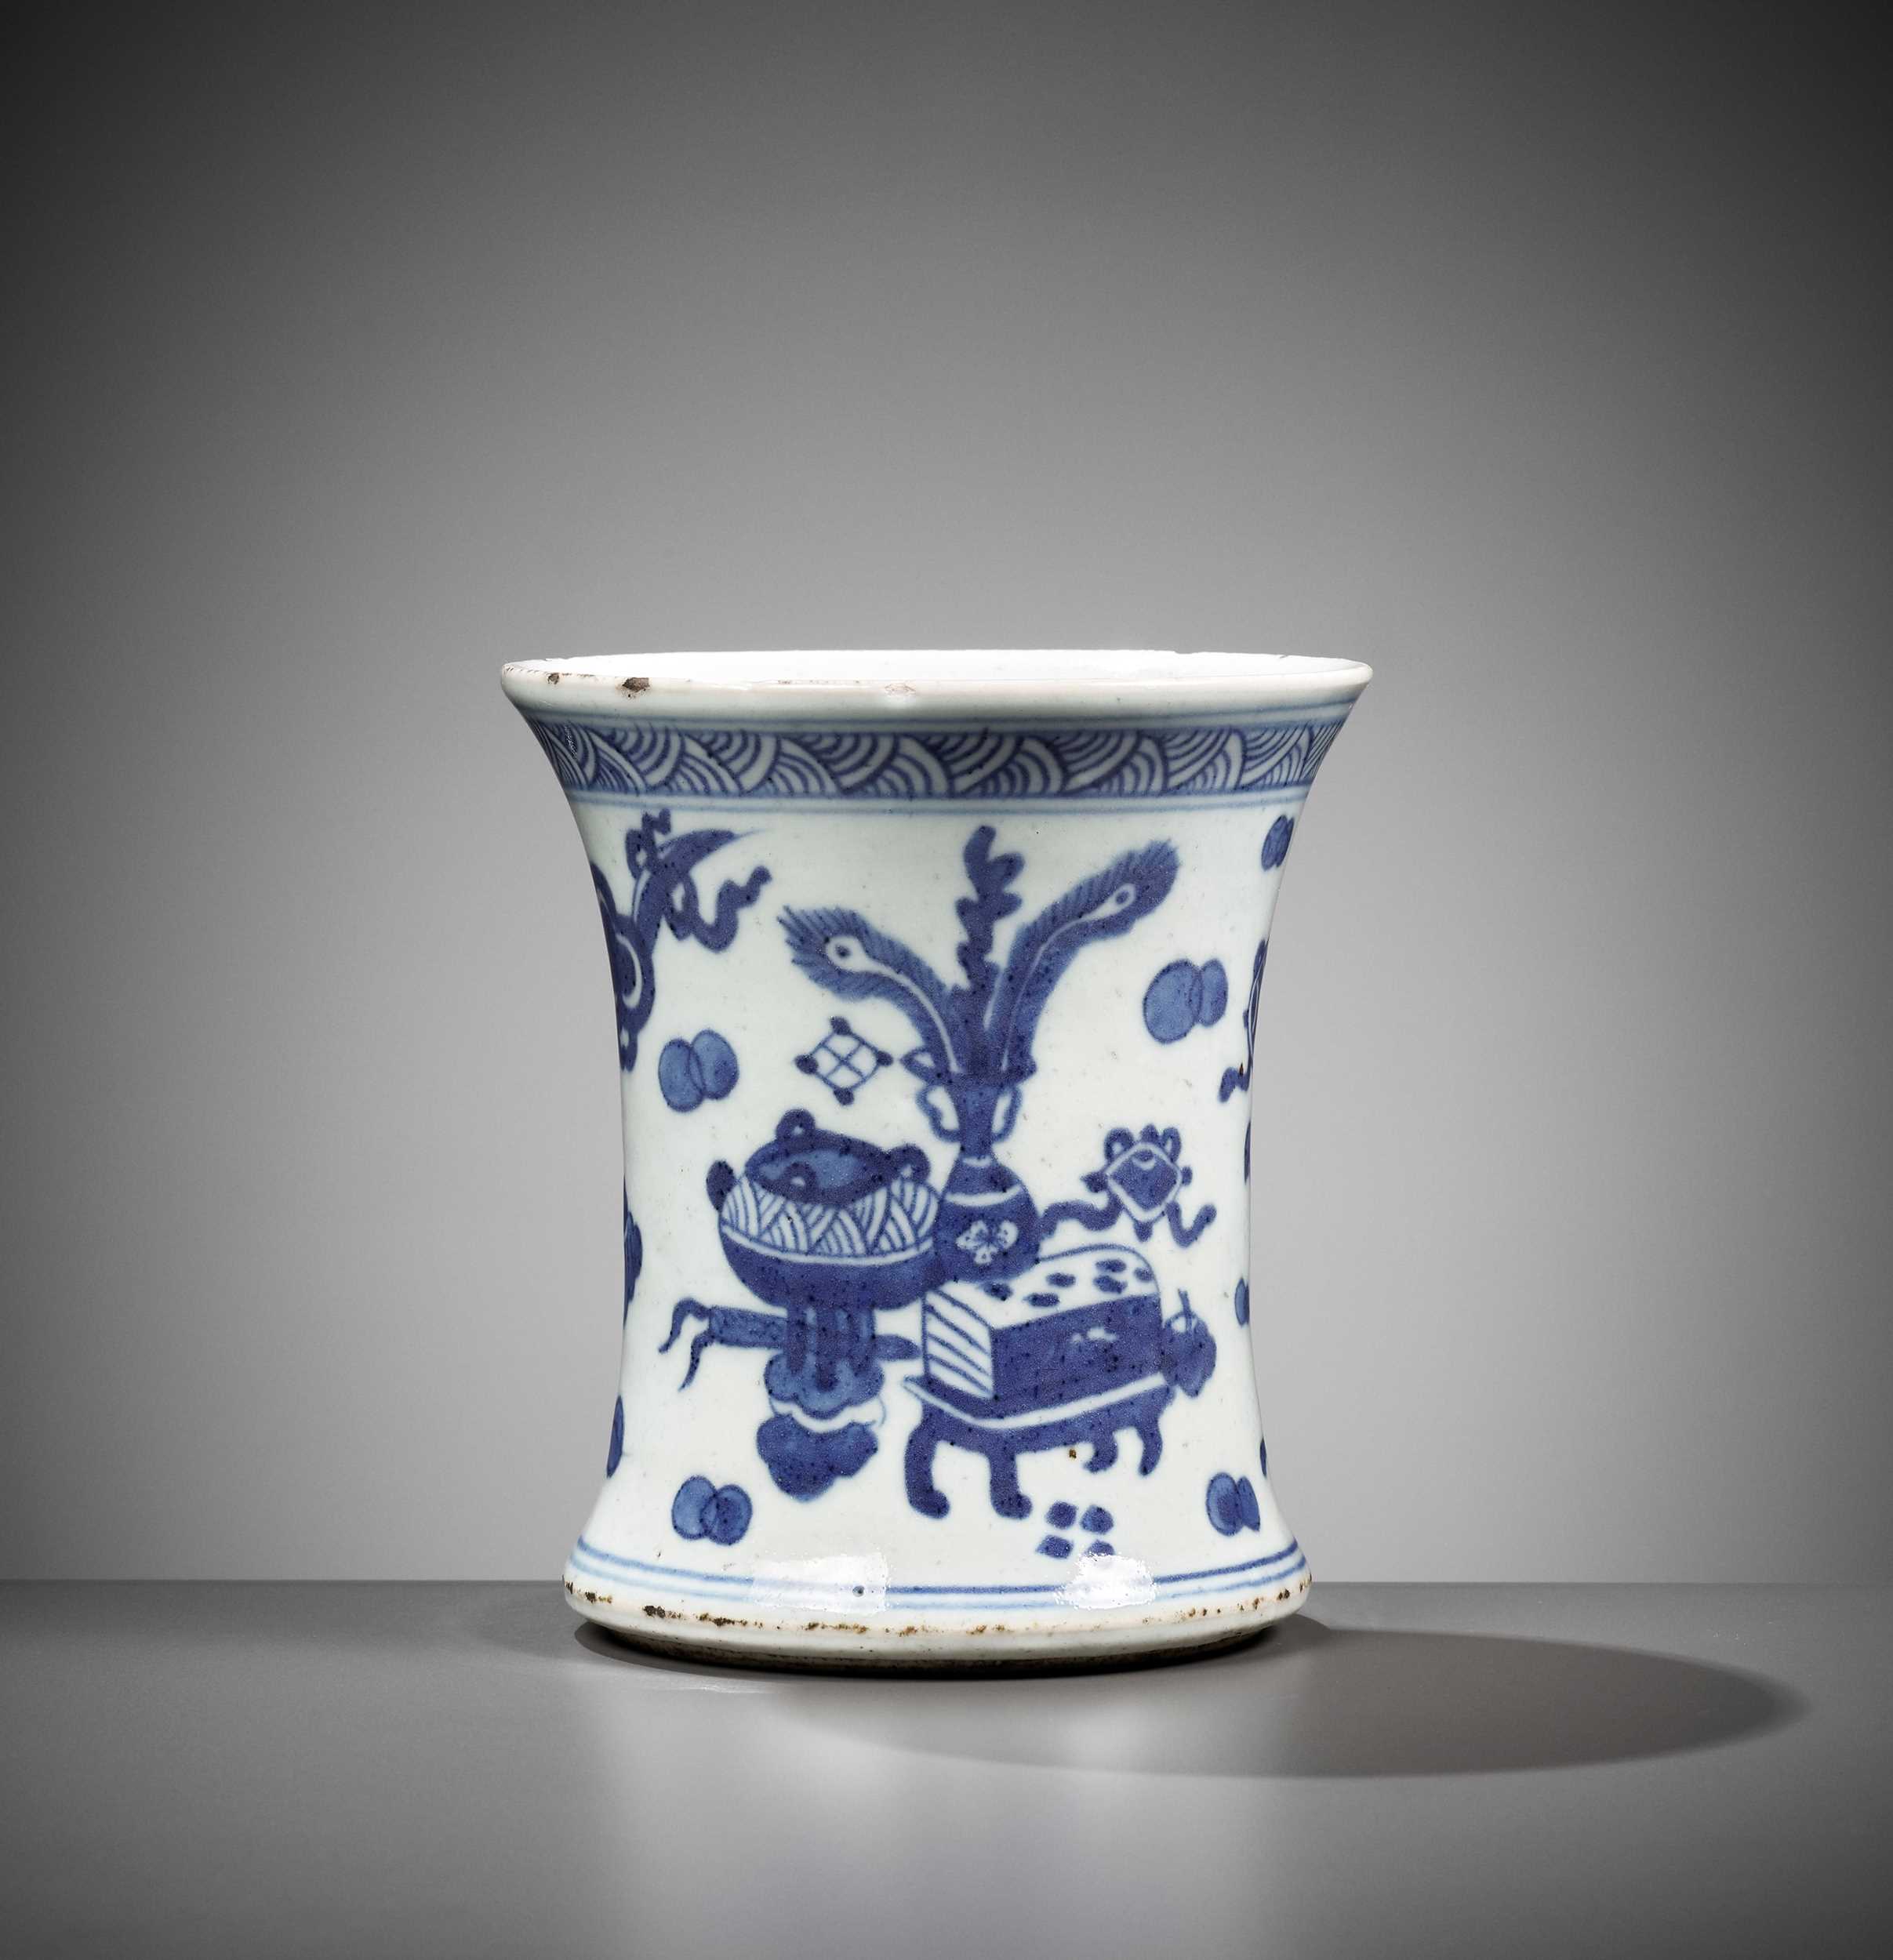 Lot 81 - A BLUE AND WHITE WAISTED ‘ANTIQUE TREASURES’ BRUSHPOT, BITONG, EARLY QING DYNASTY